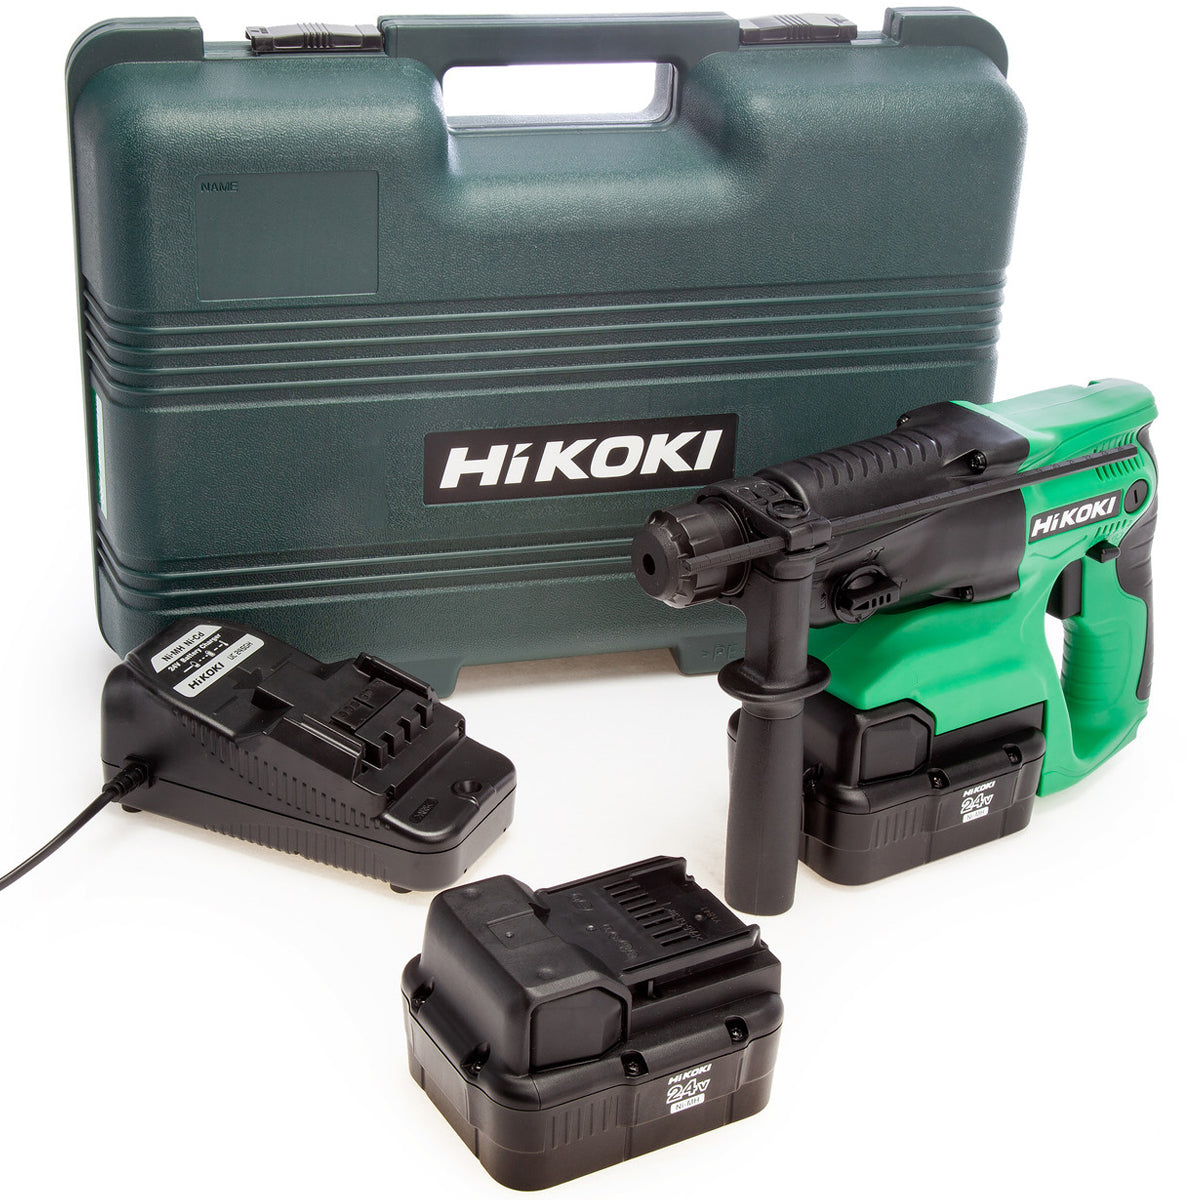 HiKOKI DH24DVC 24V SDS-Plus Rotary Hammer Drill with 2 x 2.0Ah Ni-MH Batteries Charger & Case